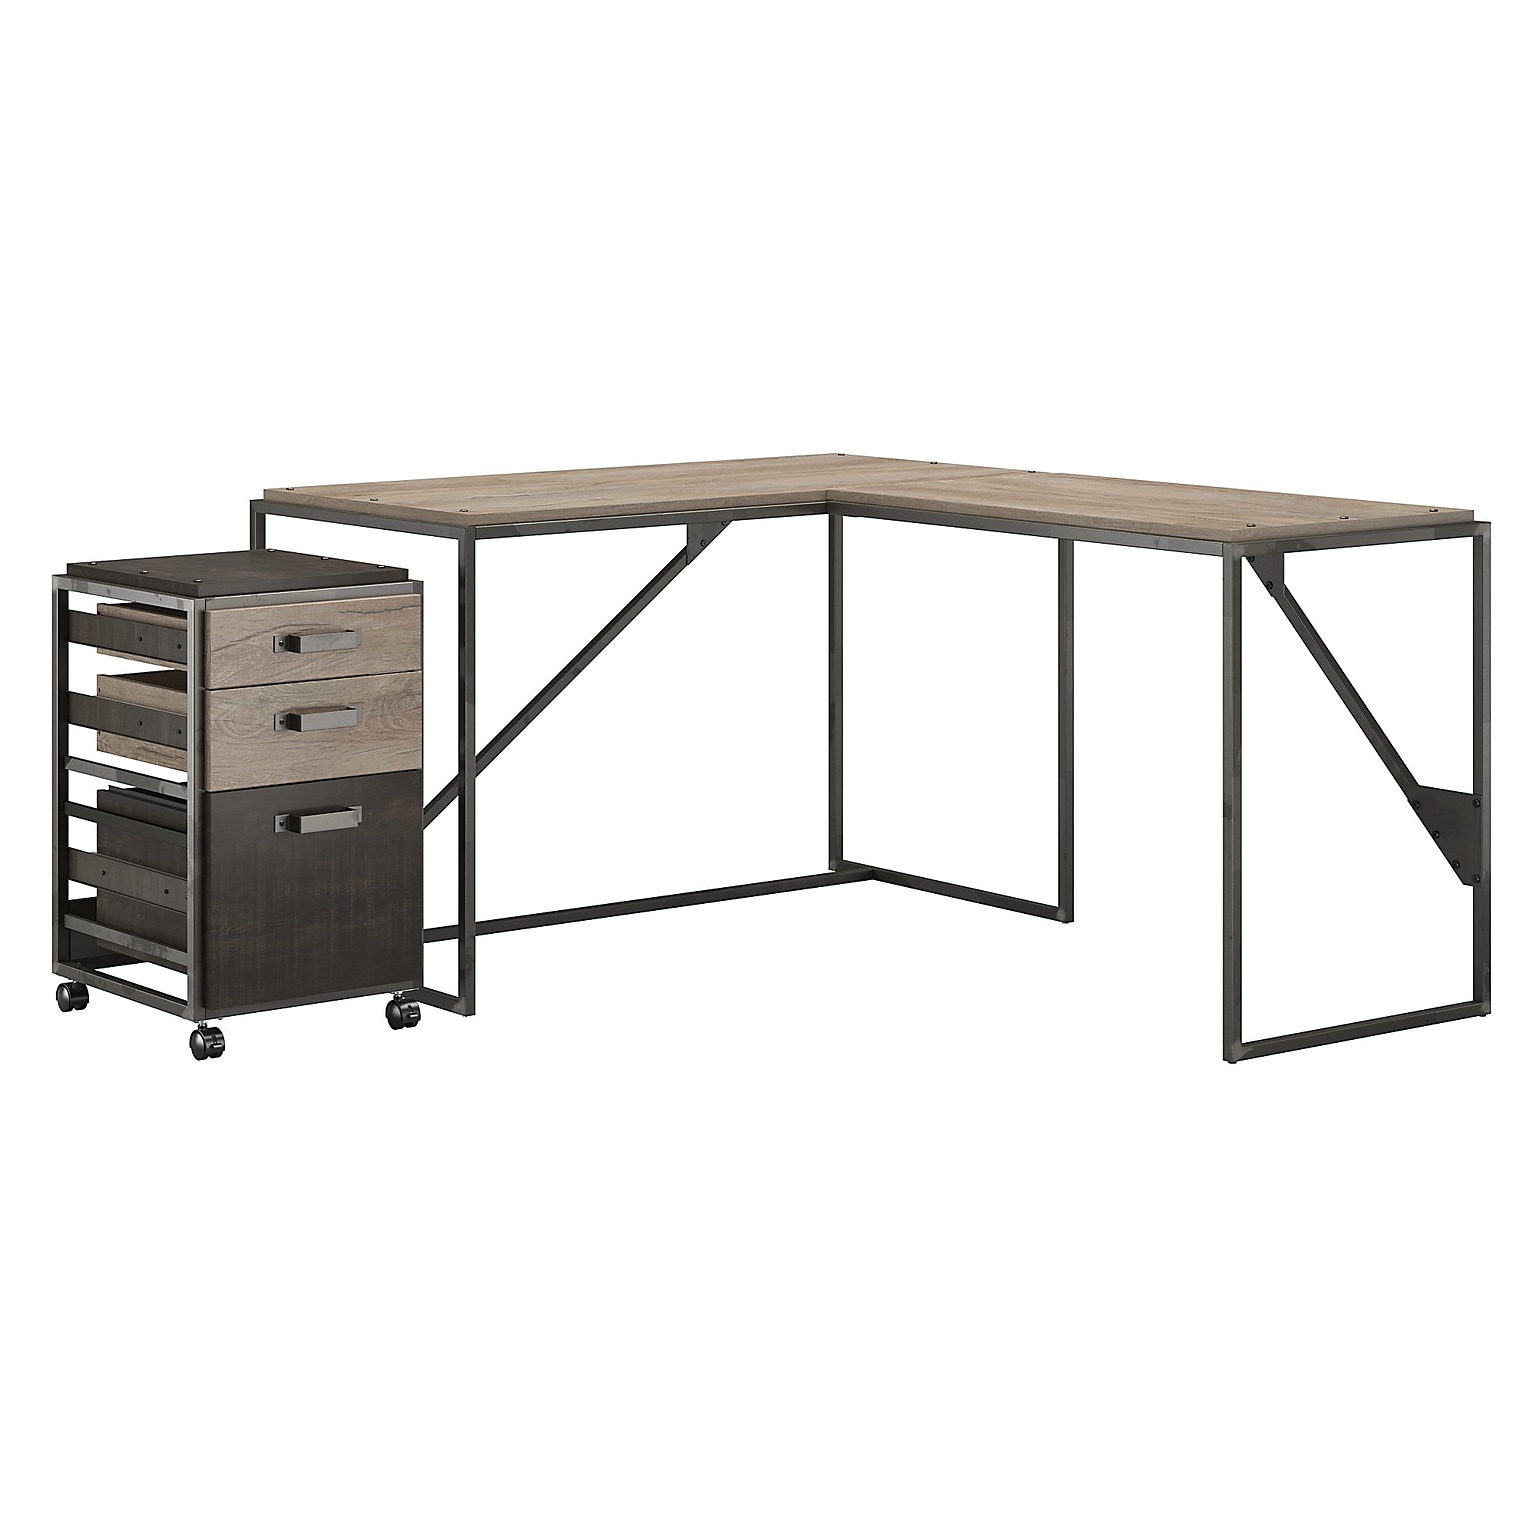 Bush Furniture Refinery 50W L Shaped Industrial Desk with 3 Drawer Mobile File Cabinet, Rustic Gray/Charred Wood (RFY004RG)